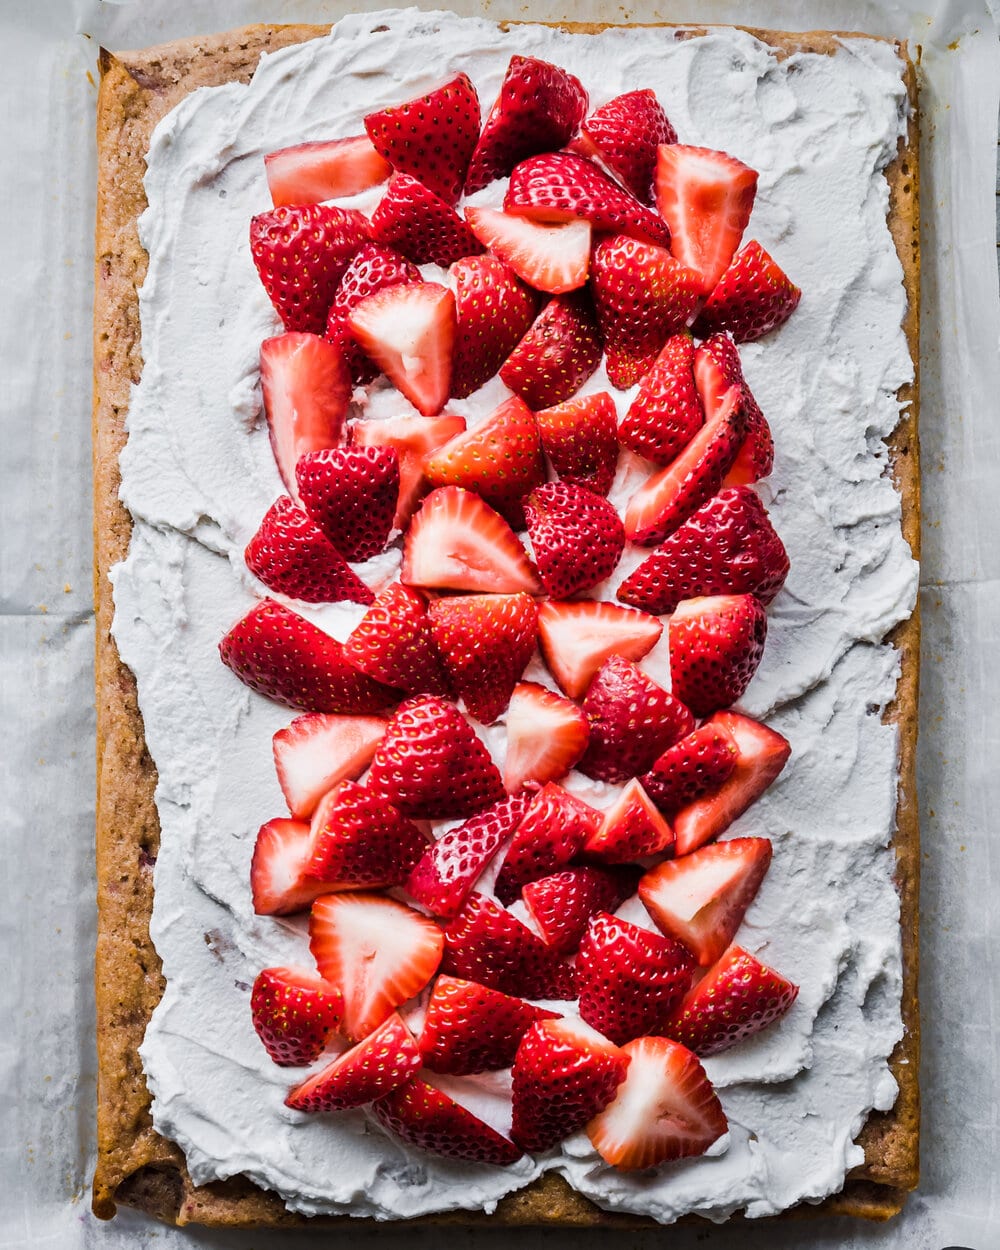 About three fourths of the frosted sheet cake covered with sliced strawberries.